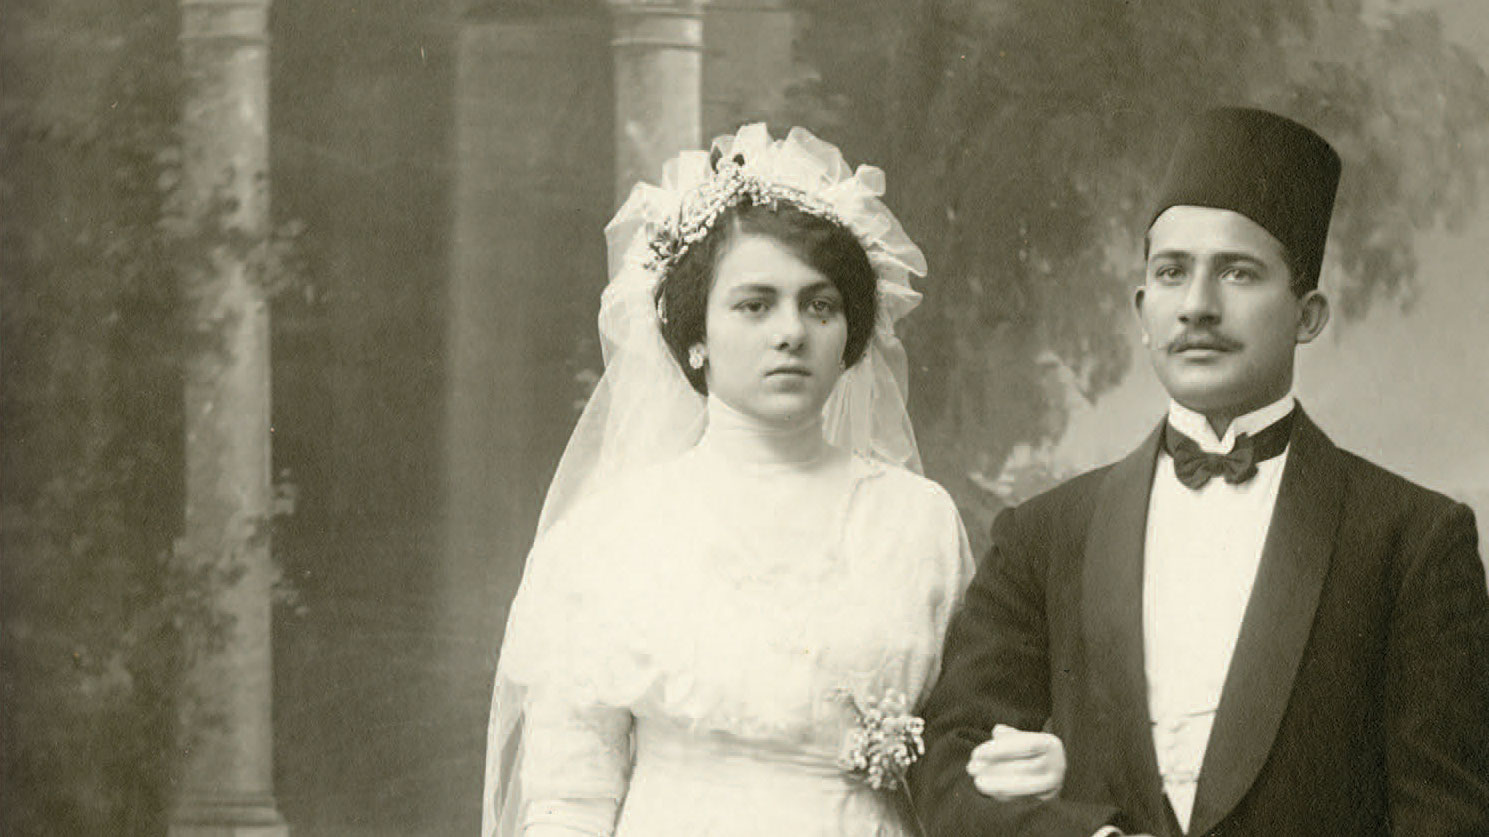 historic image of an egyptian wedding couple from book cover